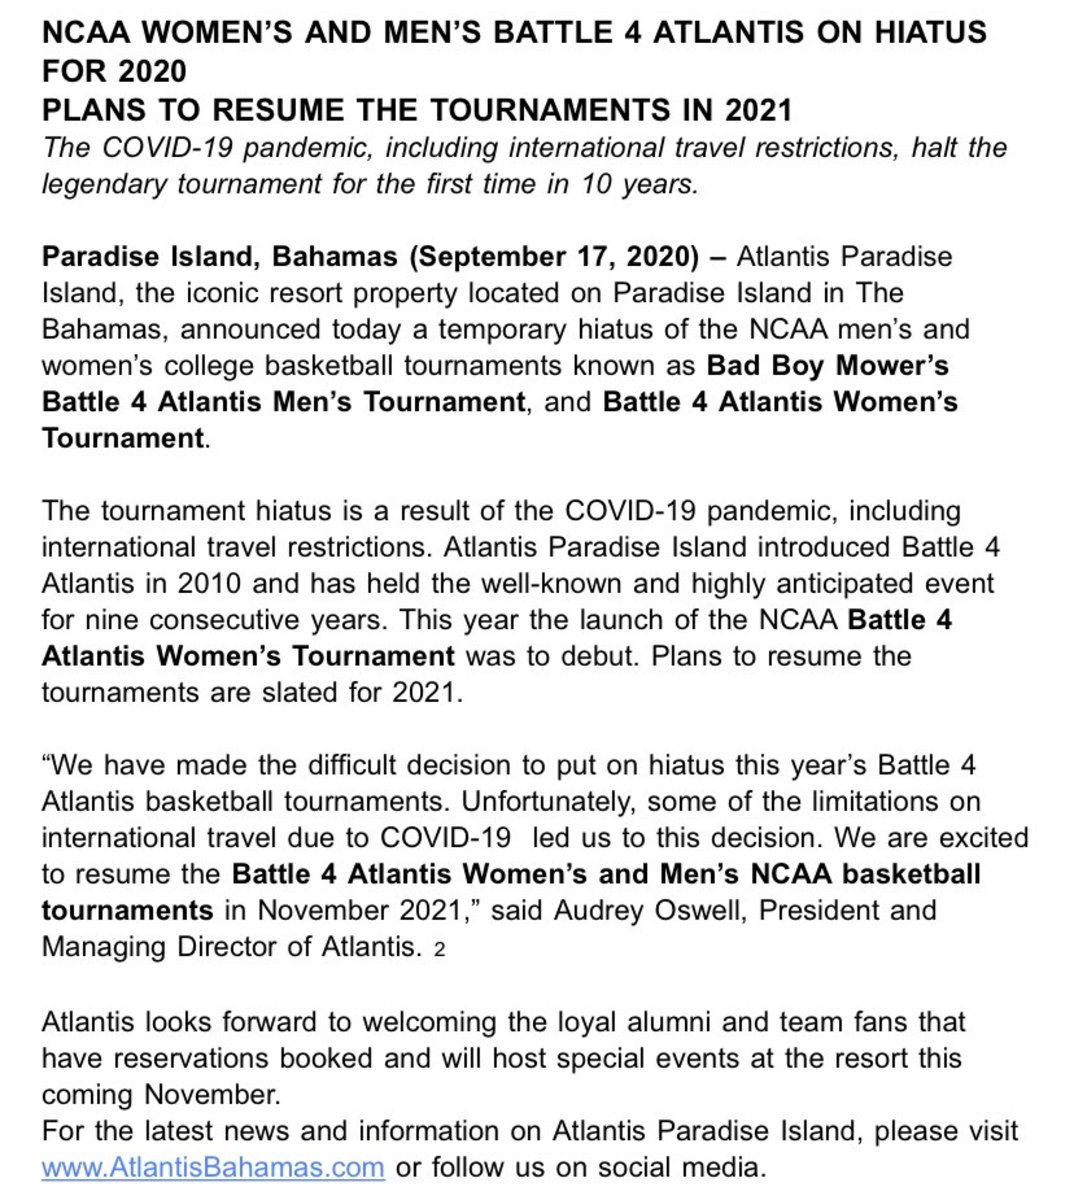 Press Release from the Battle 4 Atlantis officials